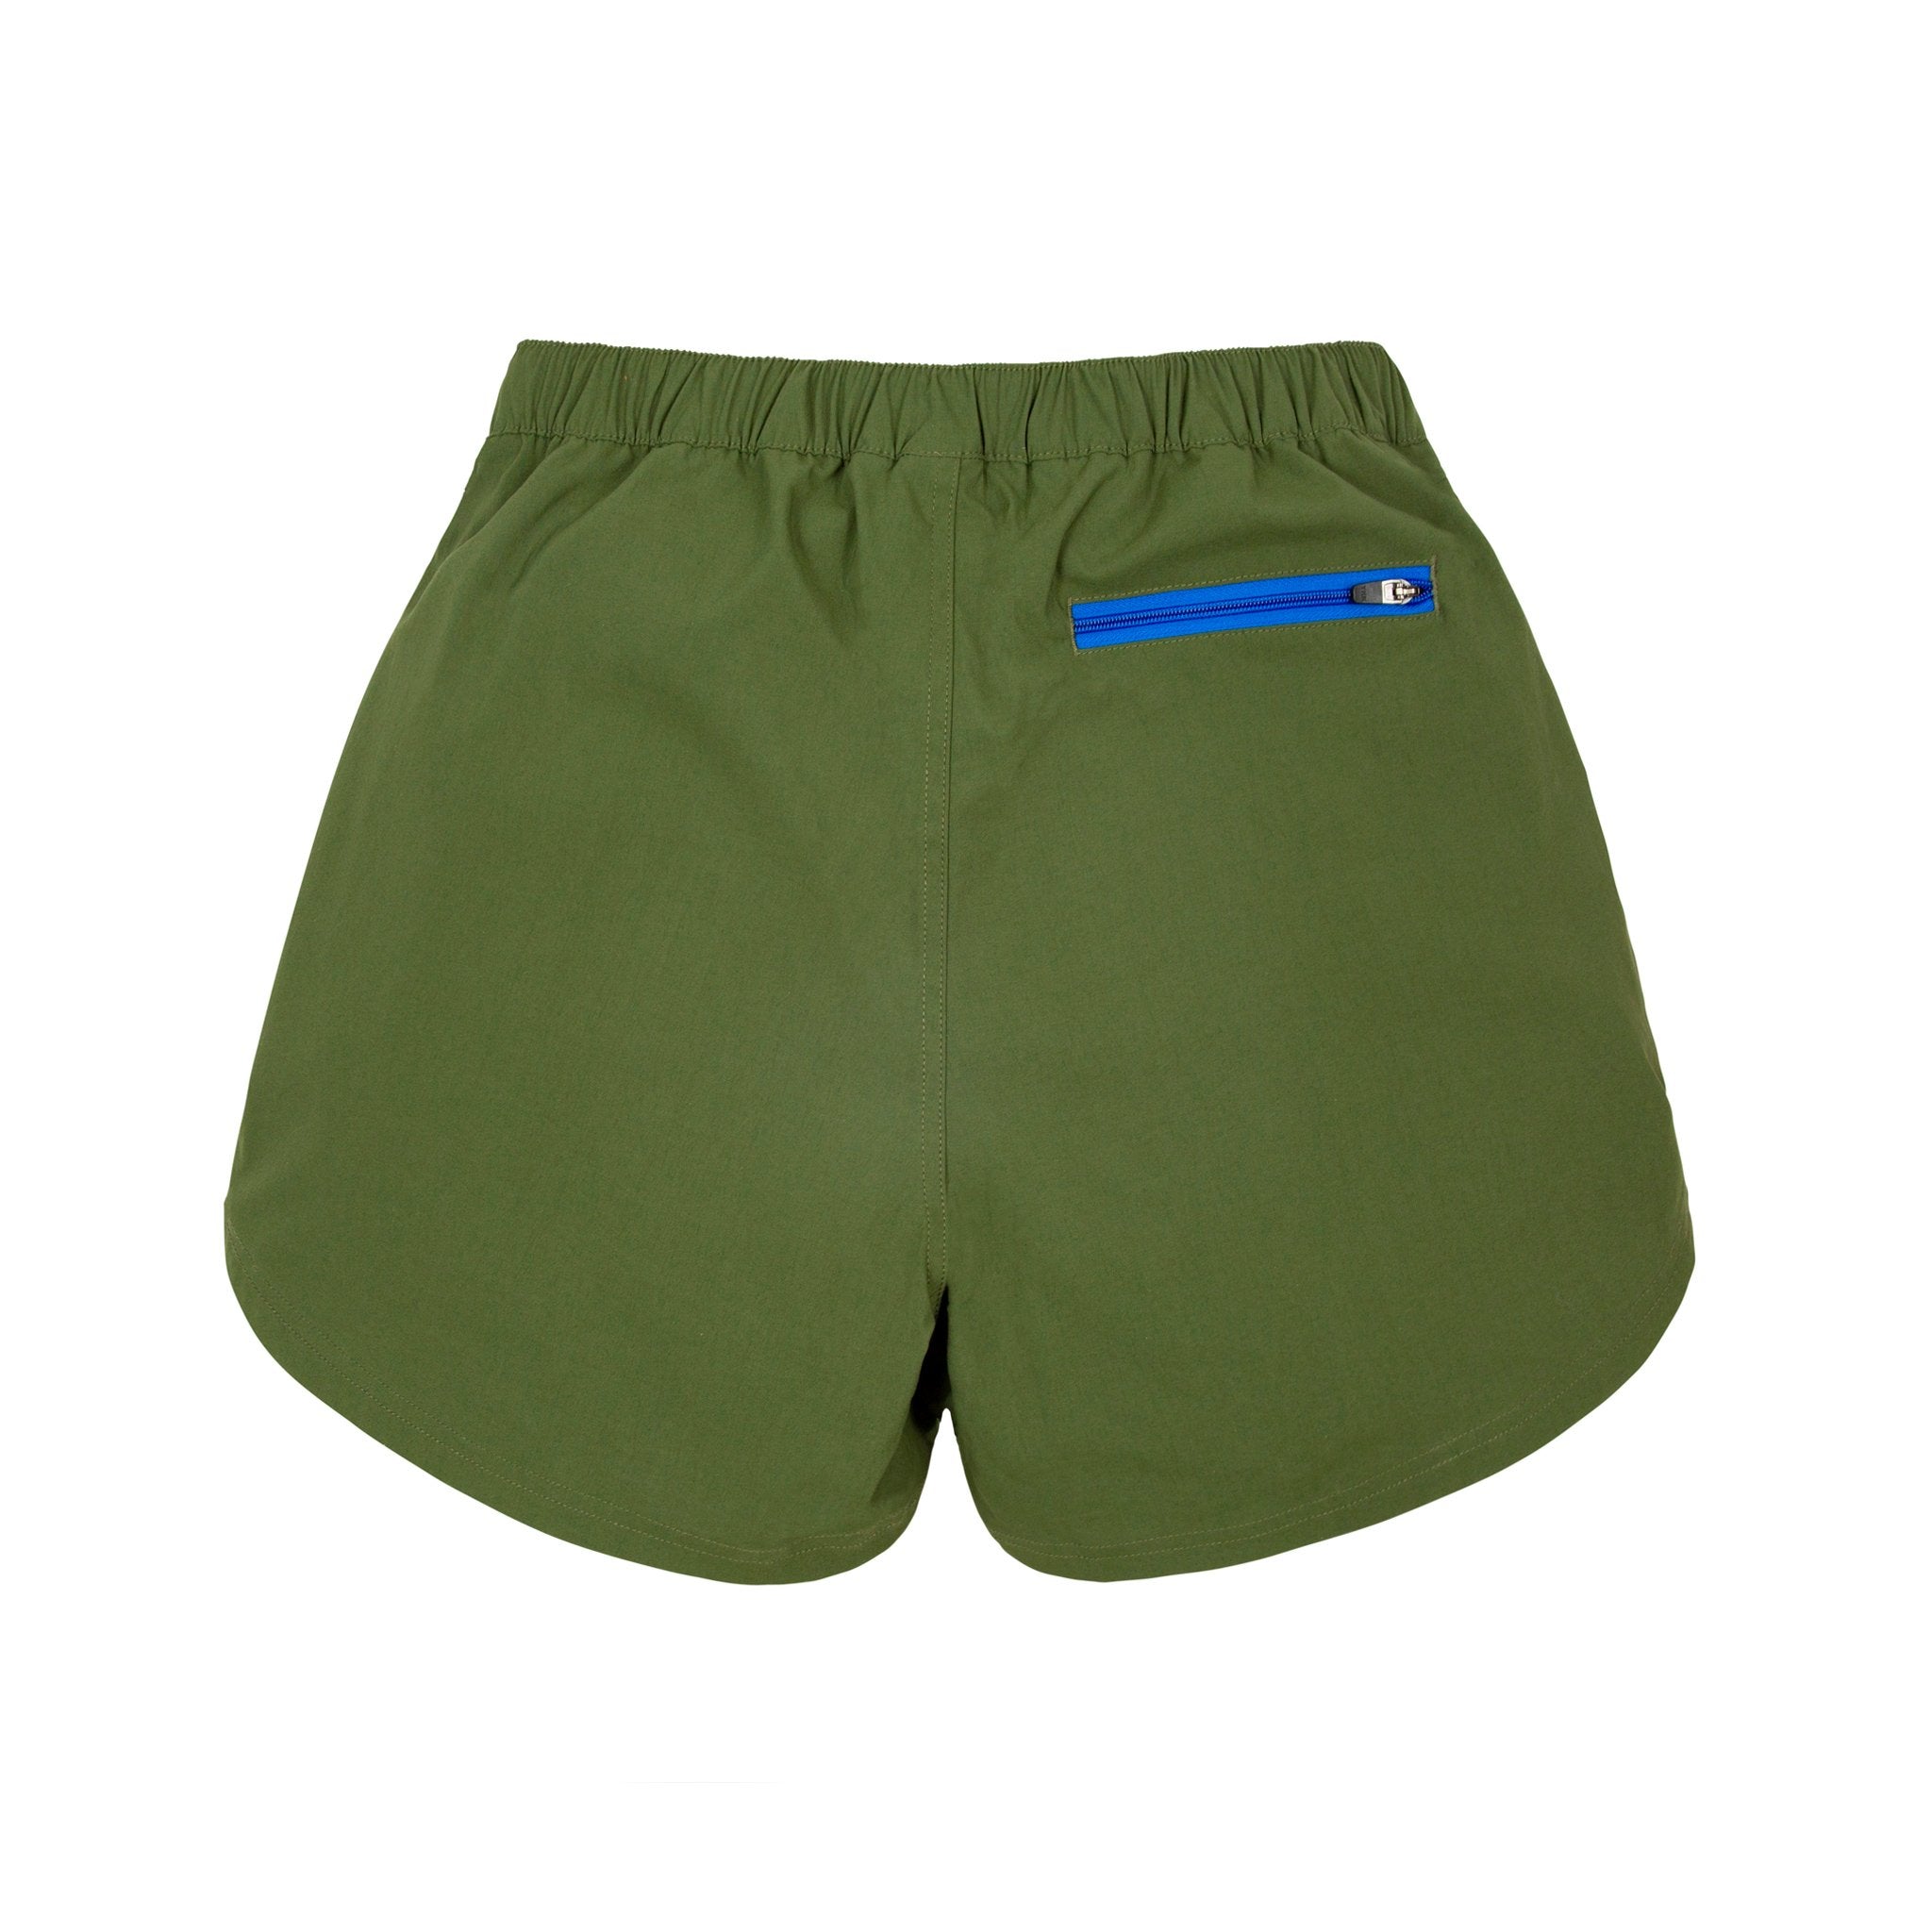 Back of Topo Designs Women's River quick-dry swim Shorts in "Olive" green showing zipper pocket.